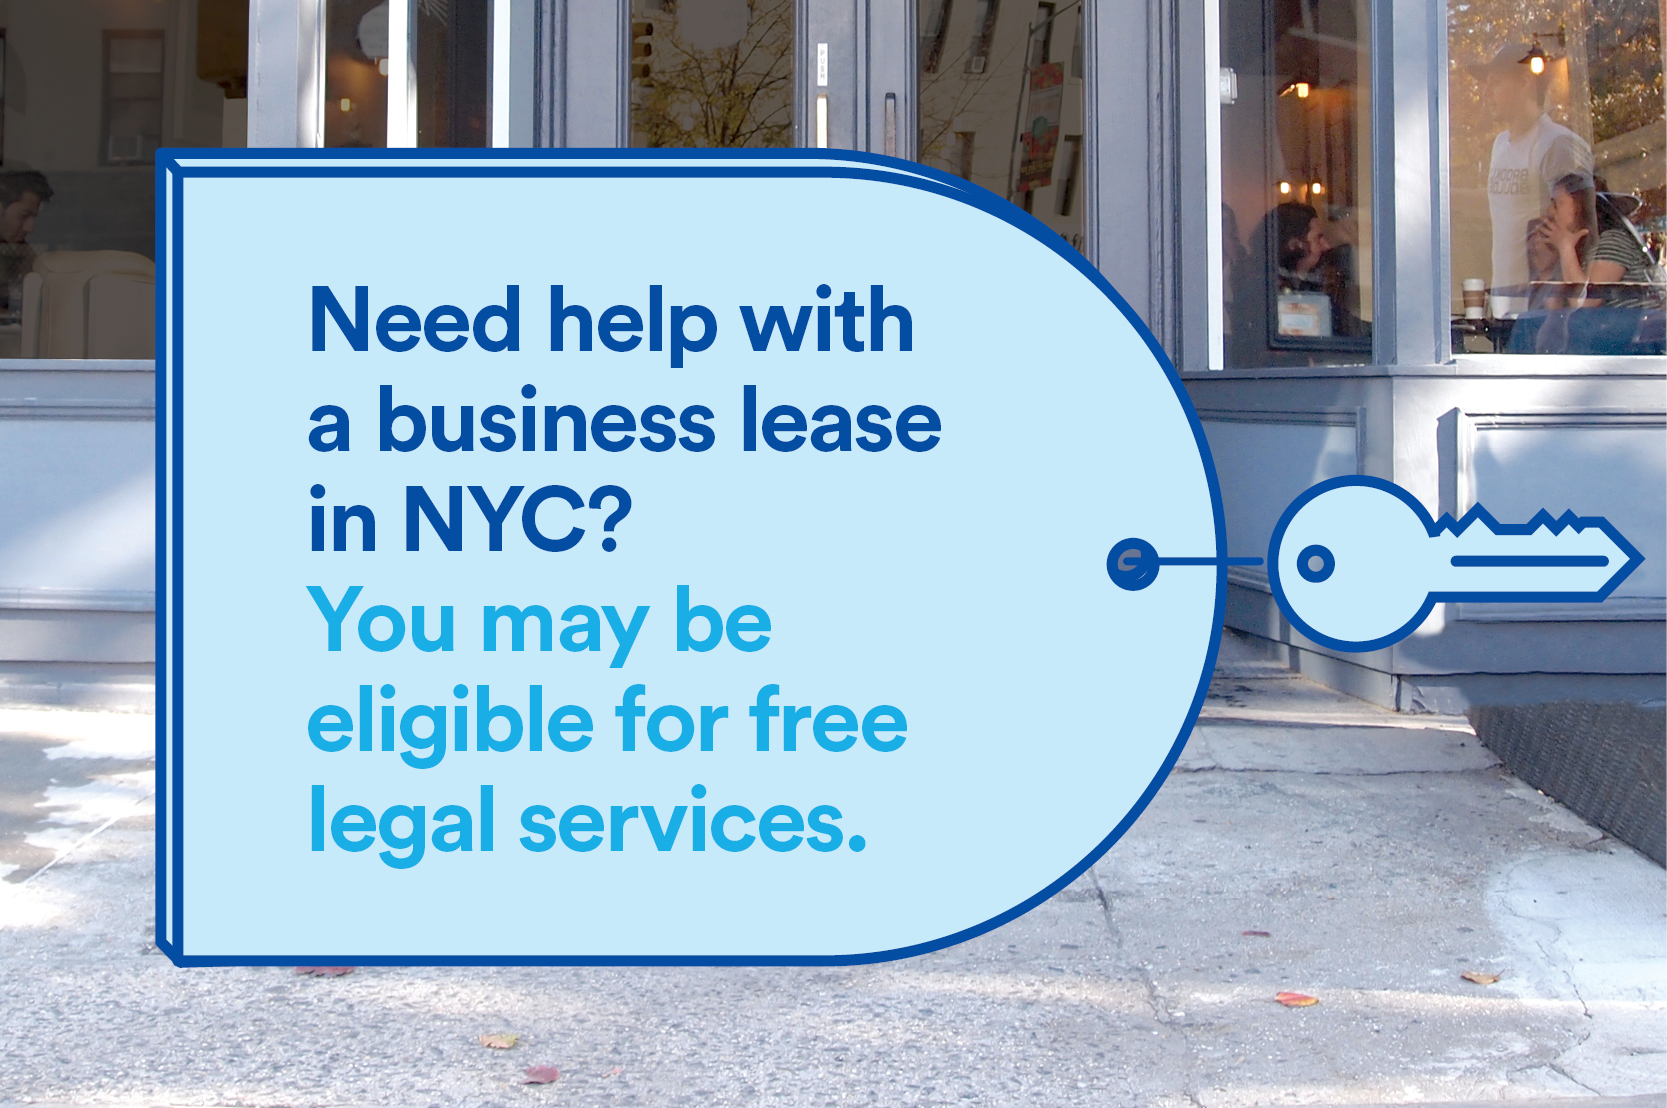 Need help with a business lease in NYC? You may be eligible for free legal services.